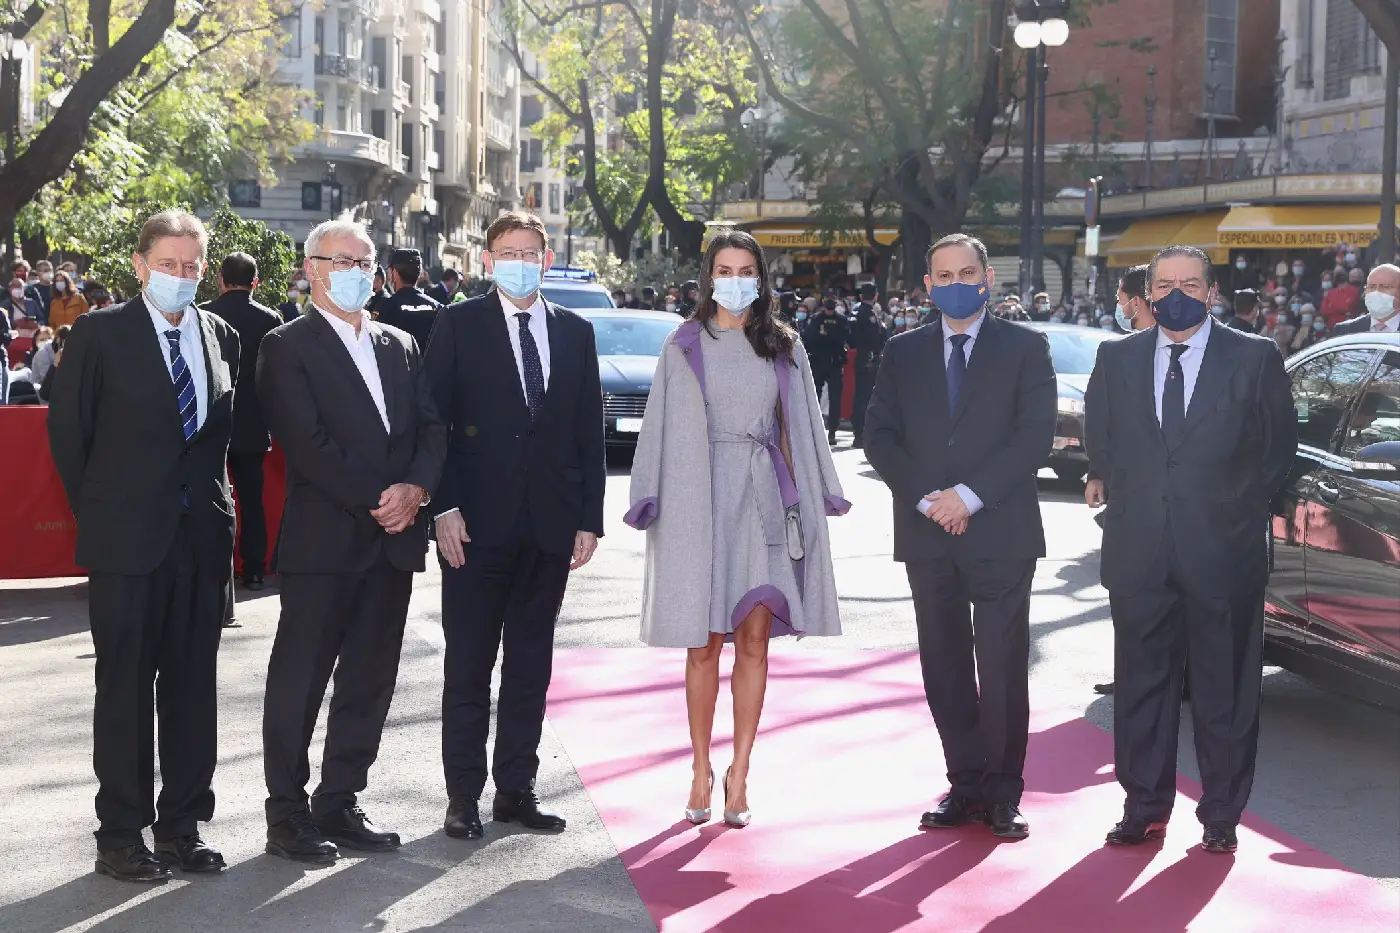 Queen Letizia of Spain spent a day in Valencia presenting awards and attending meetings